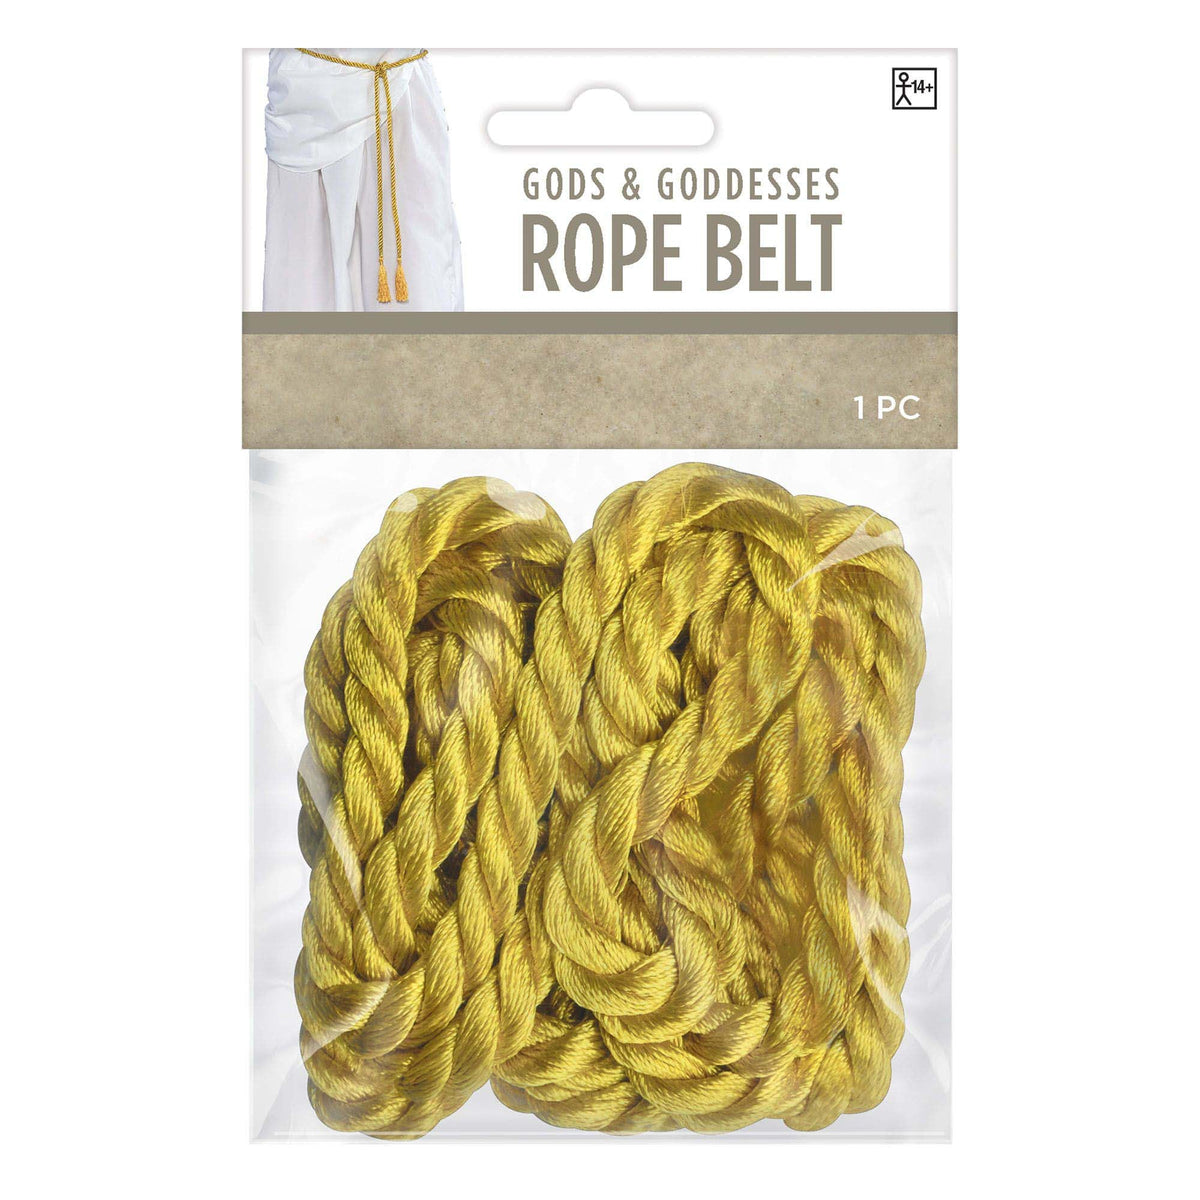 HALLOWEEN COSTUME CO. Costume Accessories Gods and Goddesses Gold Rope Belt for Adults